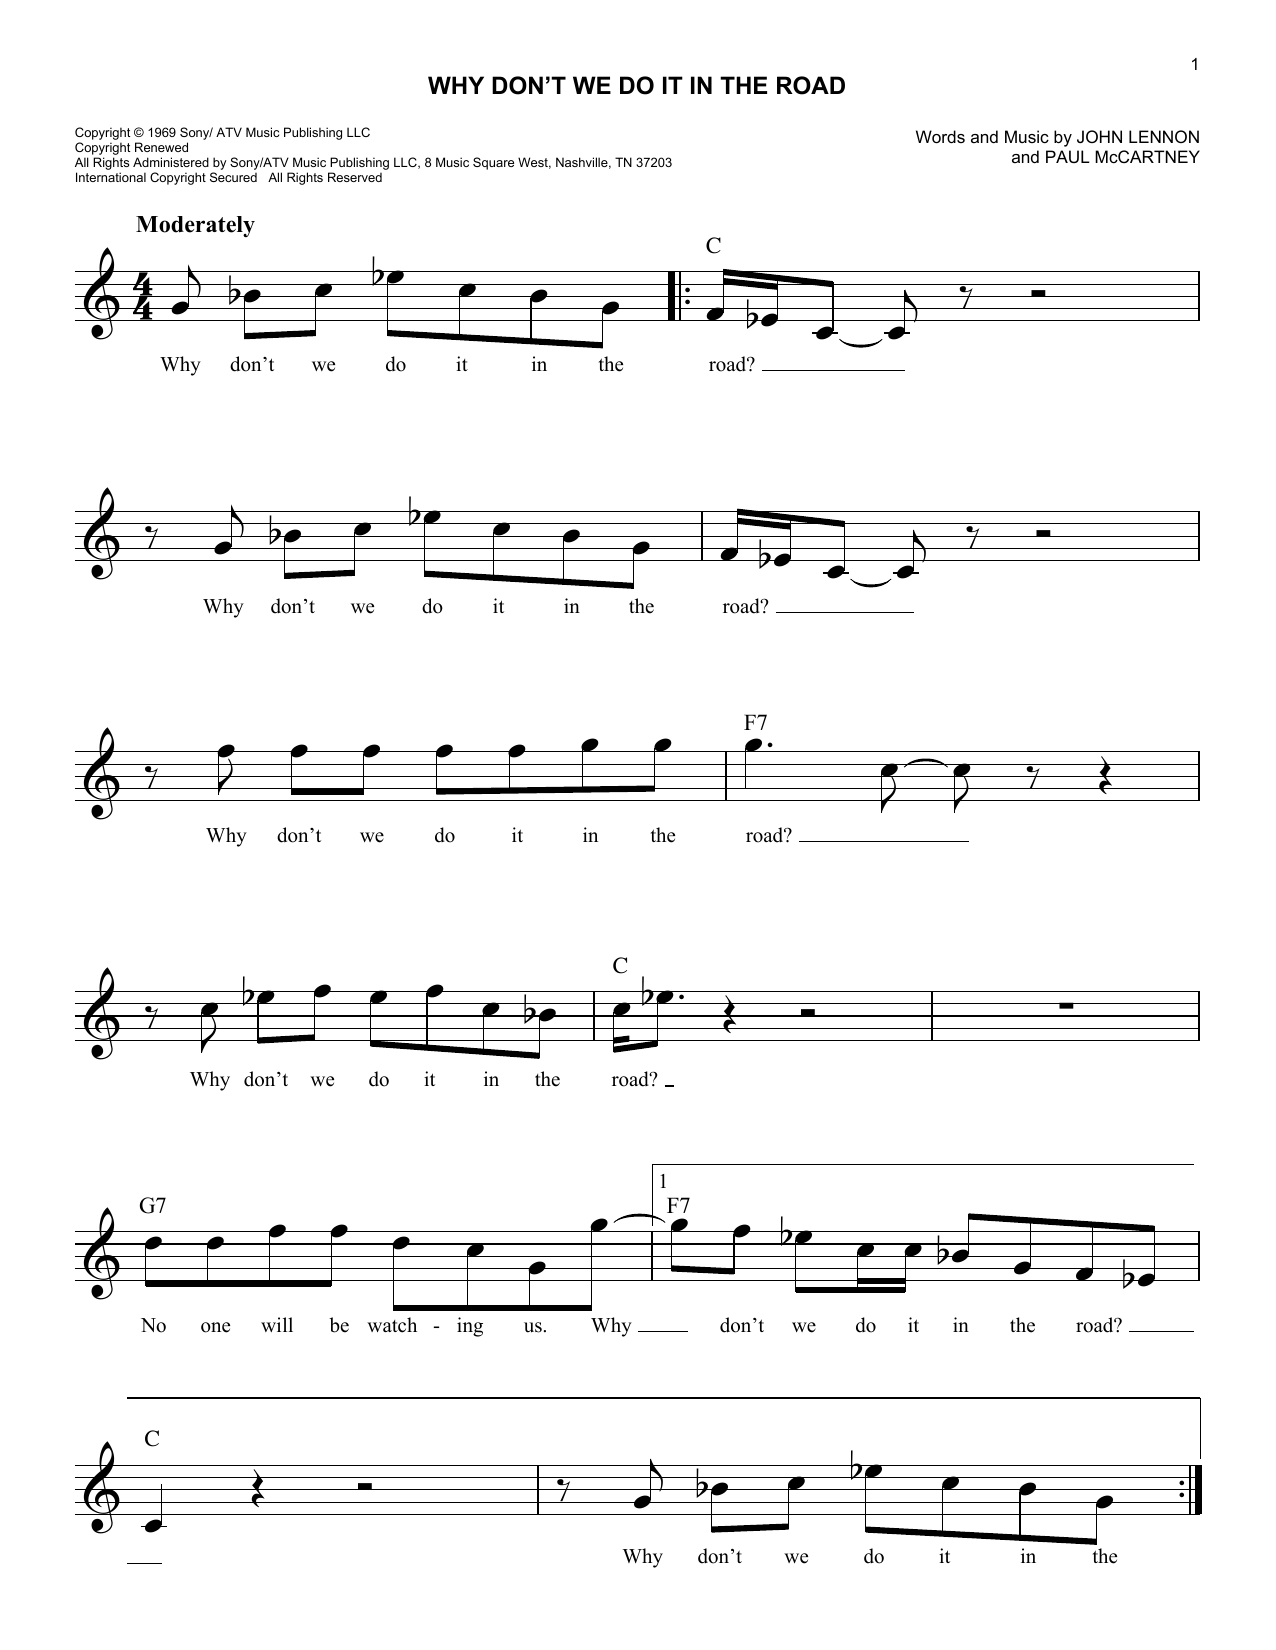 Download The Beatles Why Don't We Do It In The Road Sheet Music